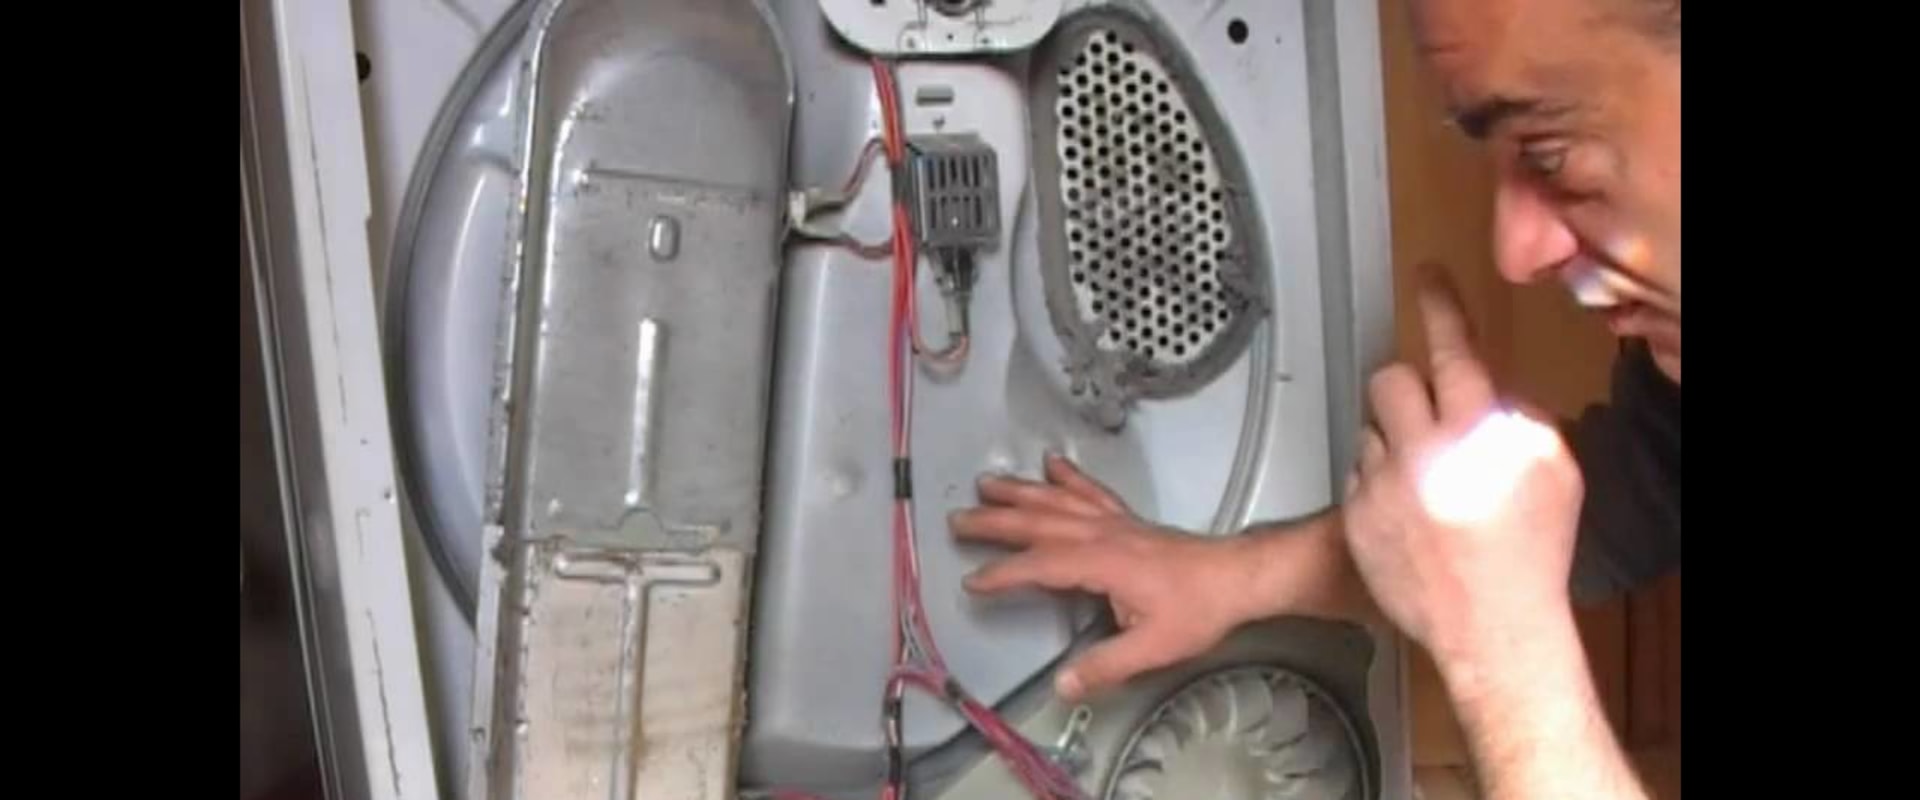 How do you deep clean a dryer?